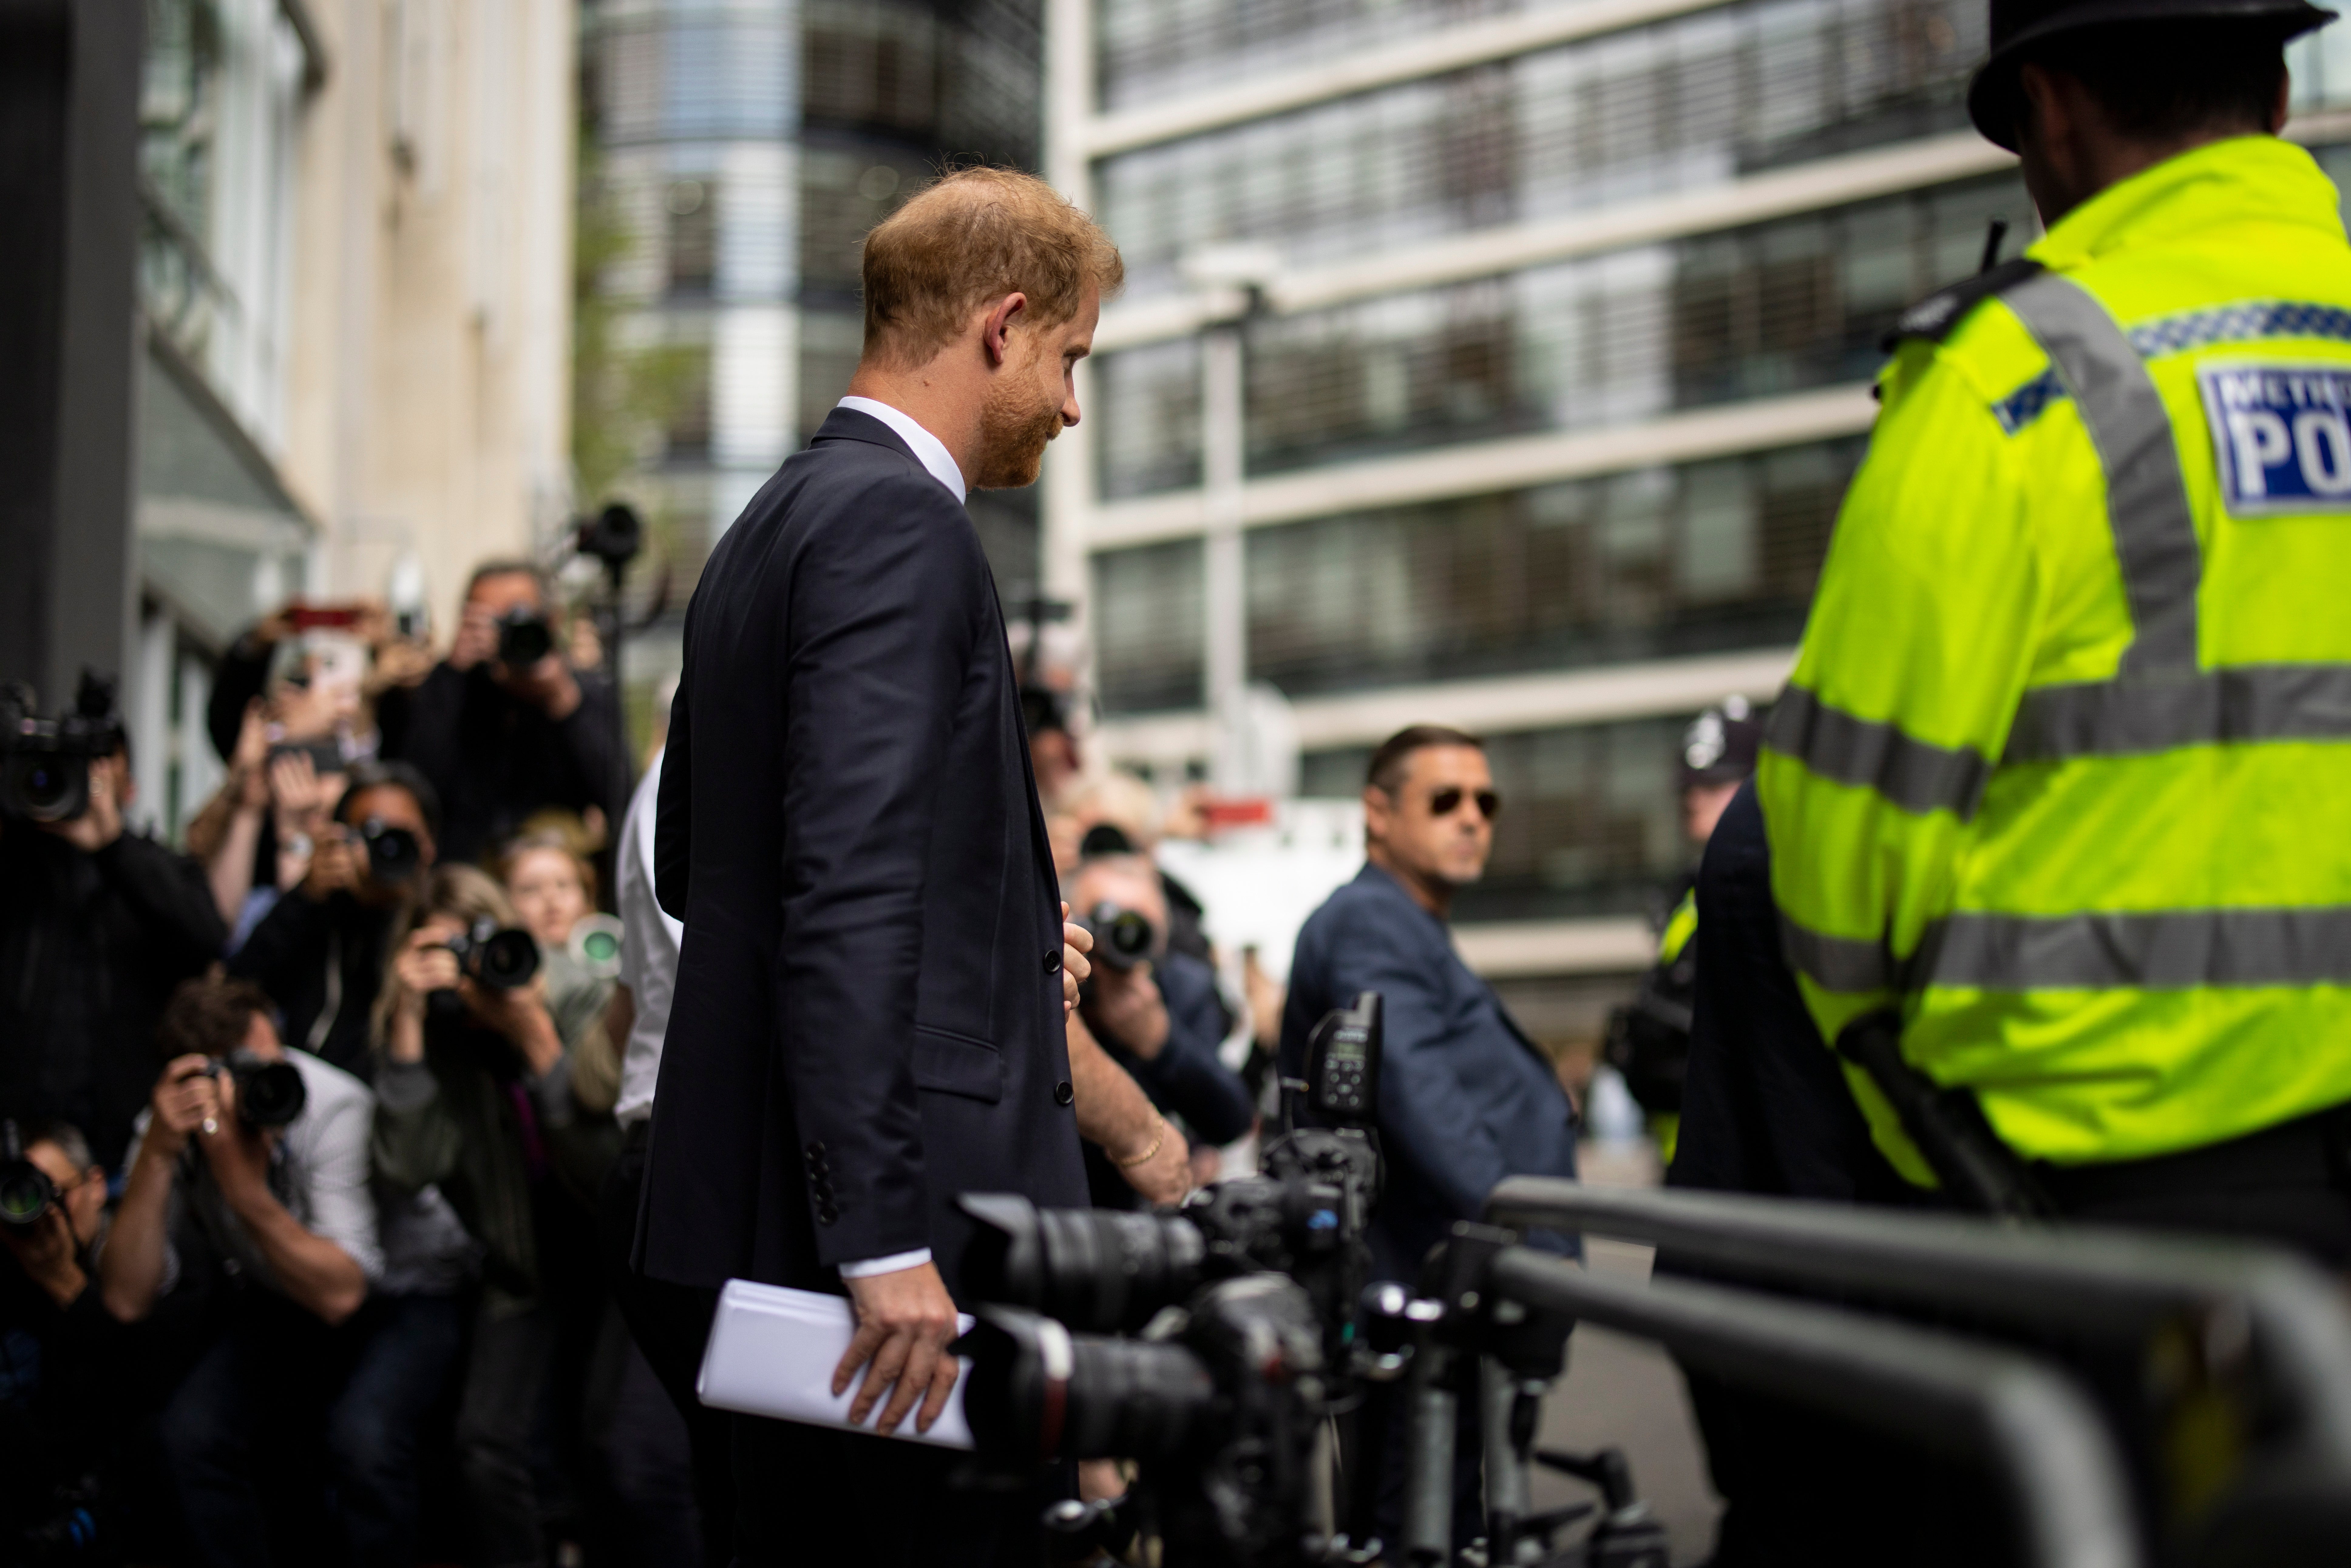 Prince Harry leaves the High Court in London after giving evidence